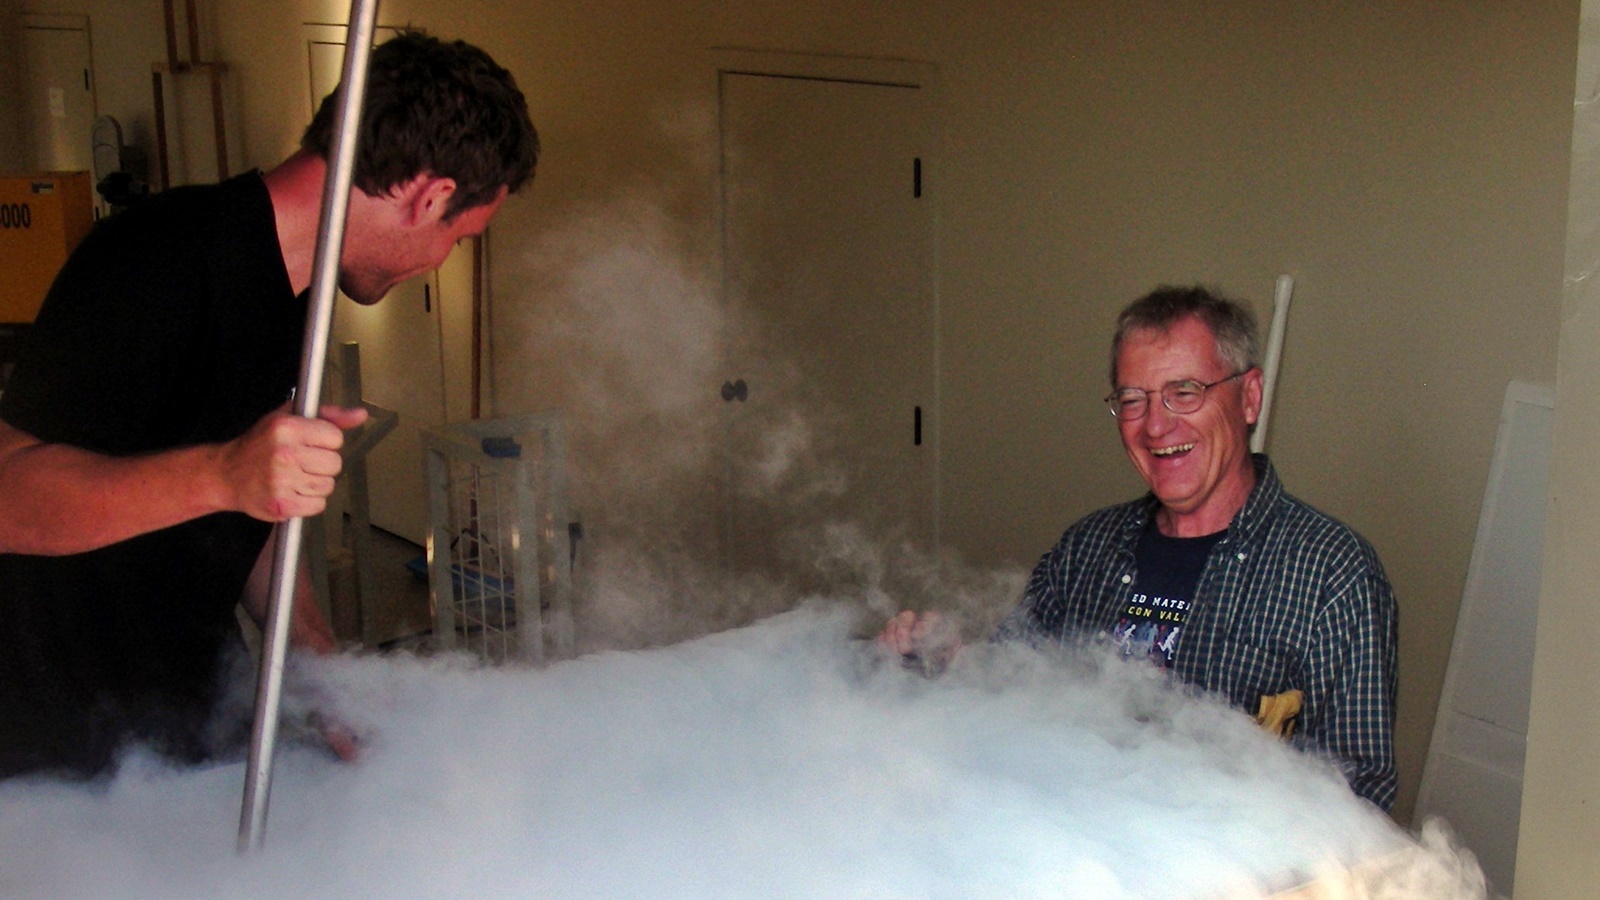 8 Aran Healy & Greg Martin starting the cold soak with dry ice